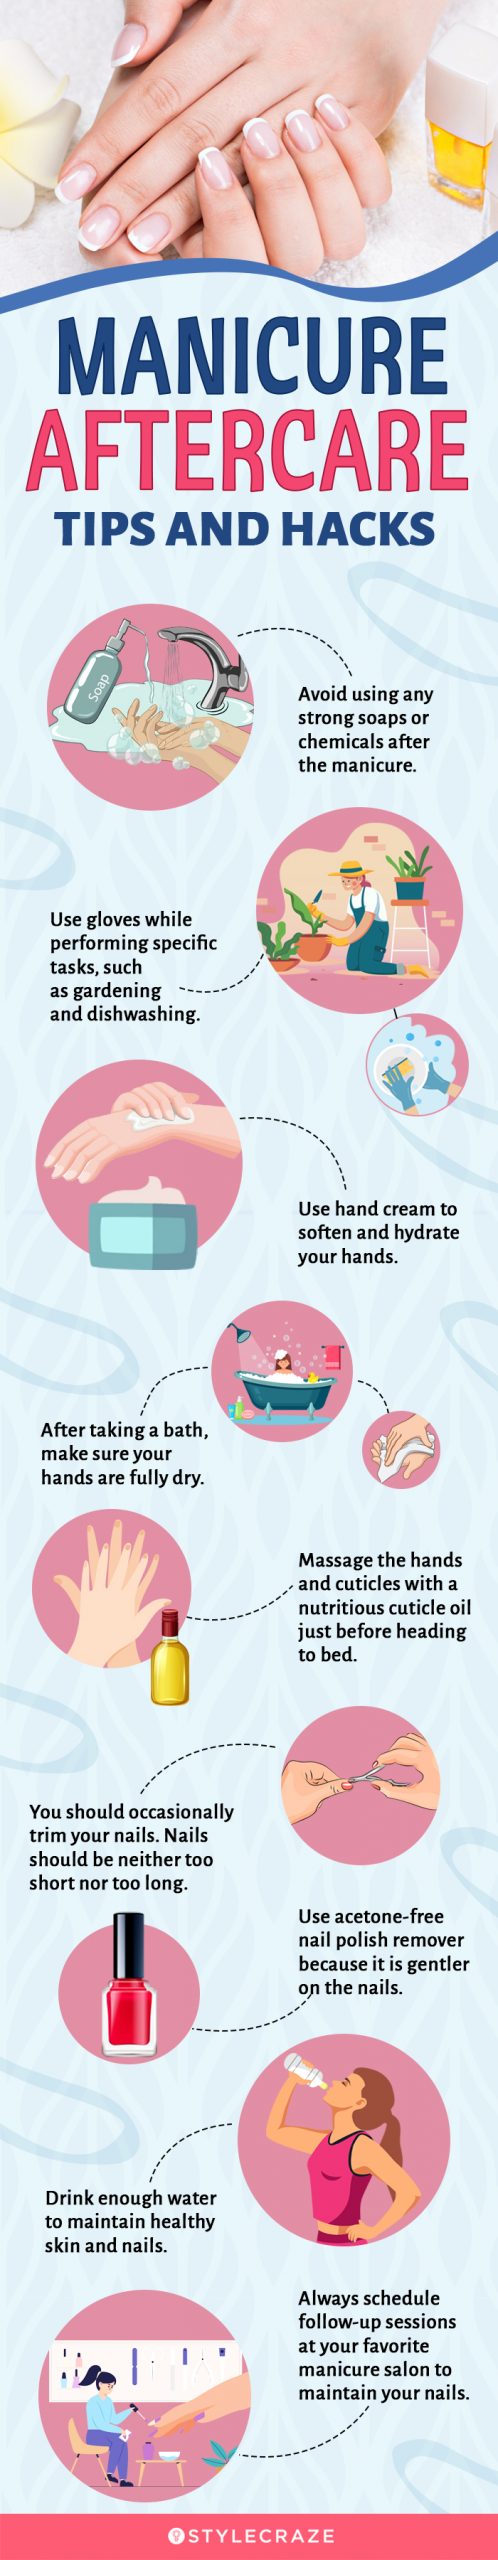 manicure aftercare tips and hacks [infographic]